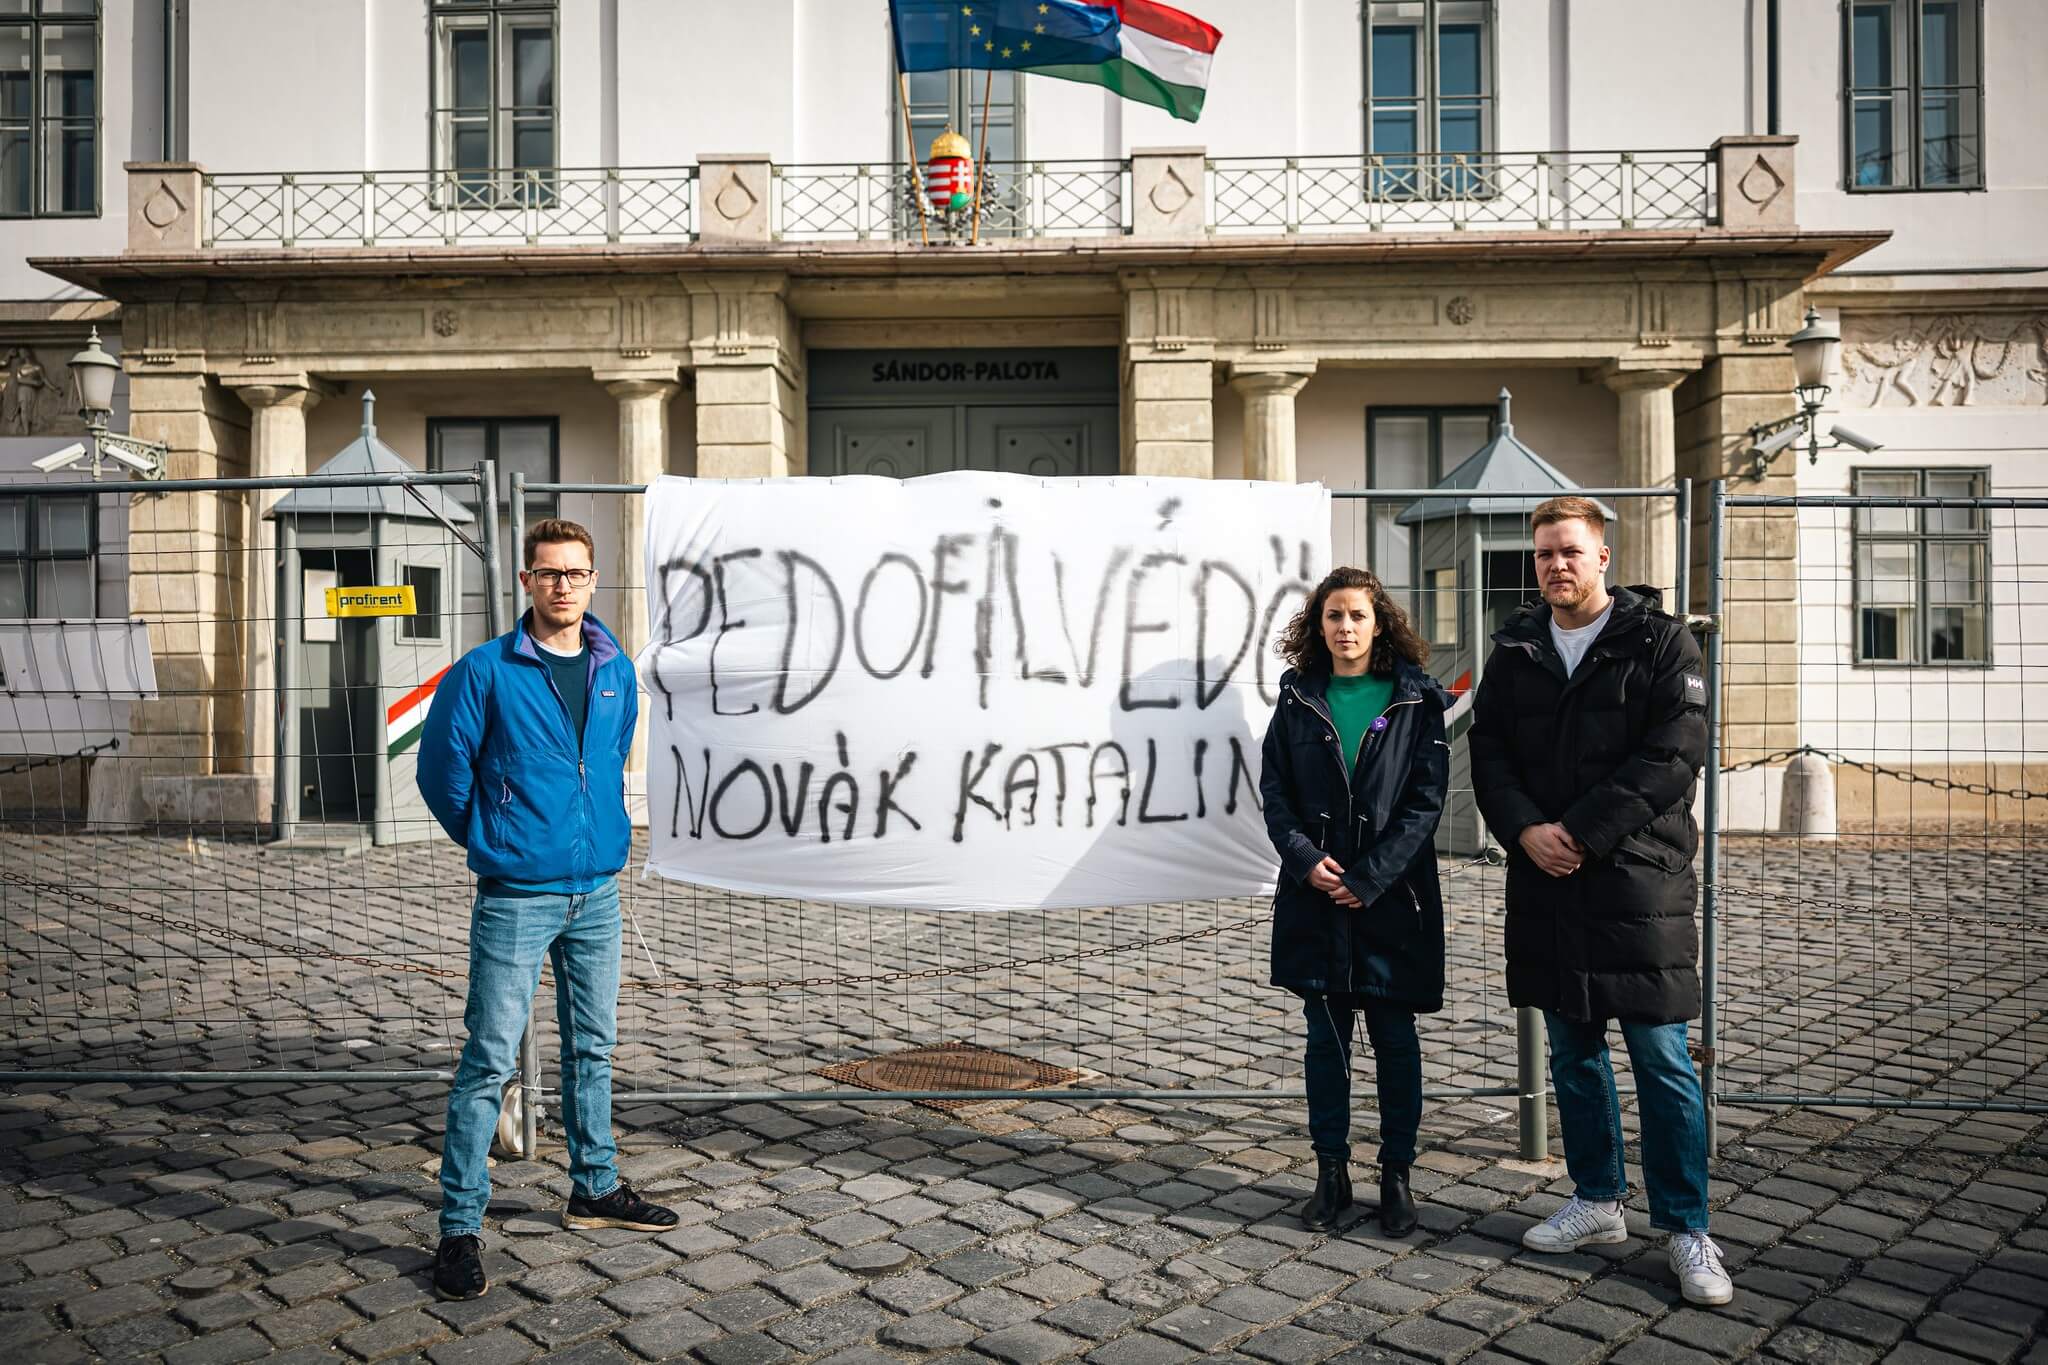 Updated: Opposition Outraged By President For Pardoning Man Convicted Of Abetting Paedophilia In Hungary